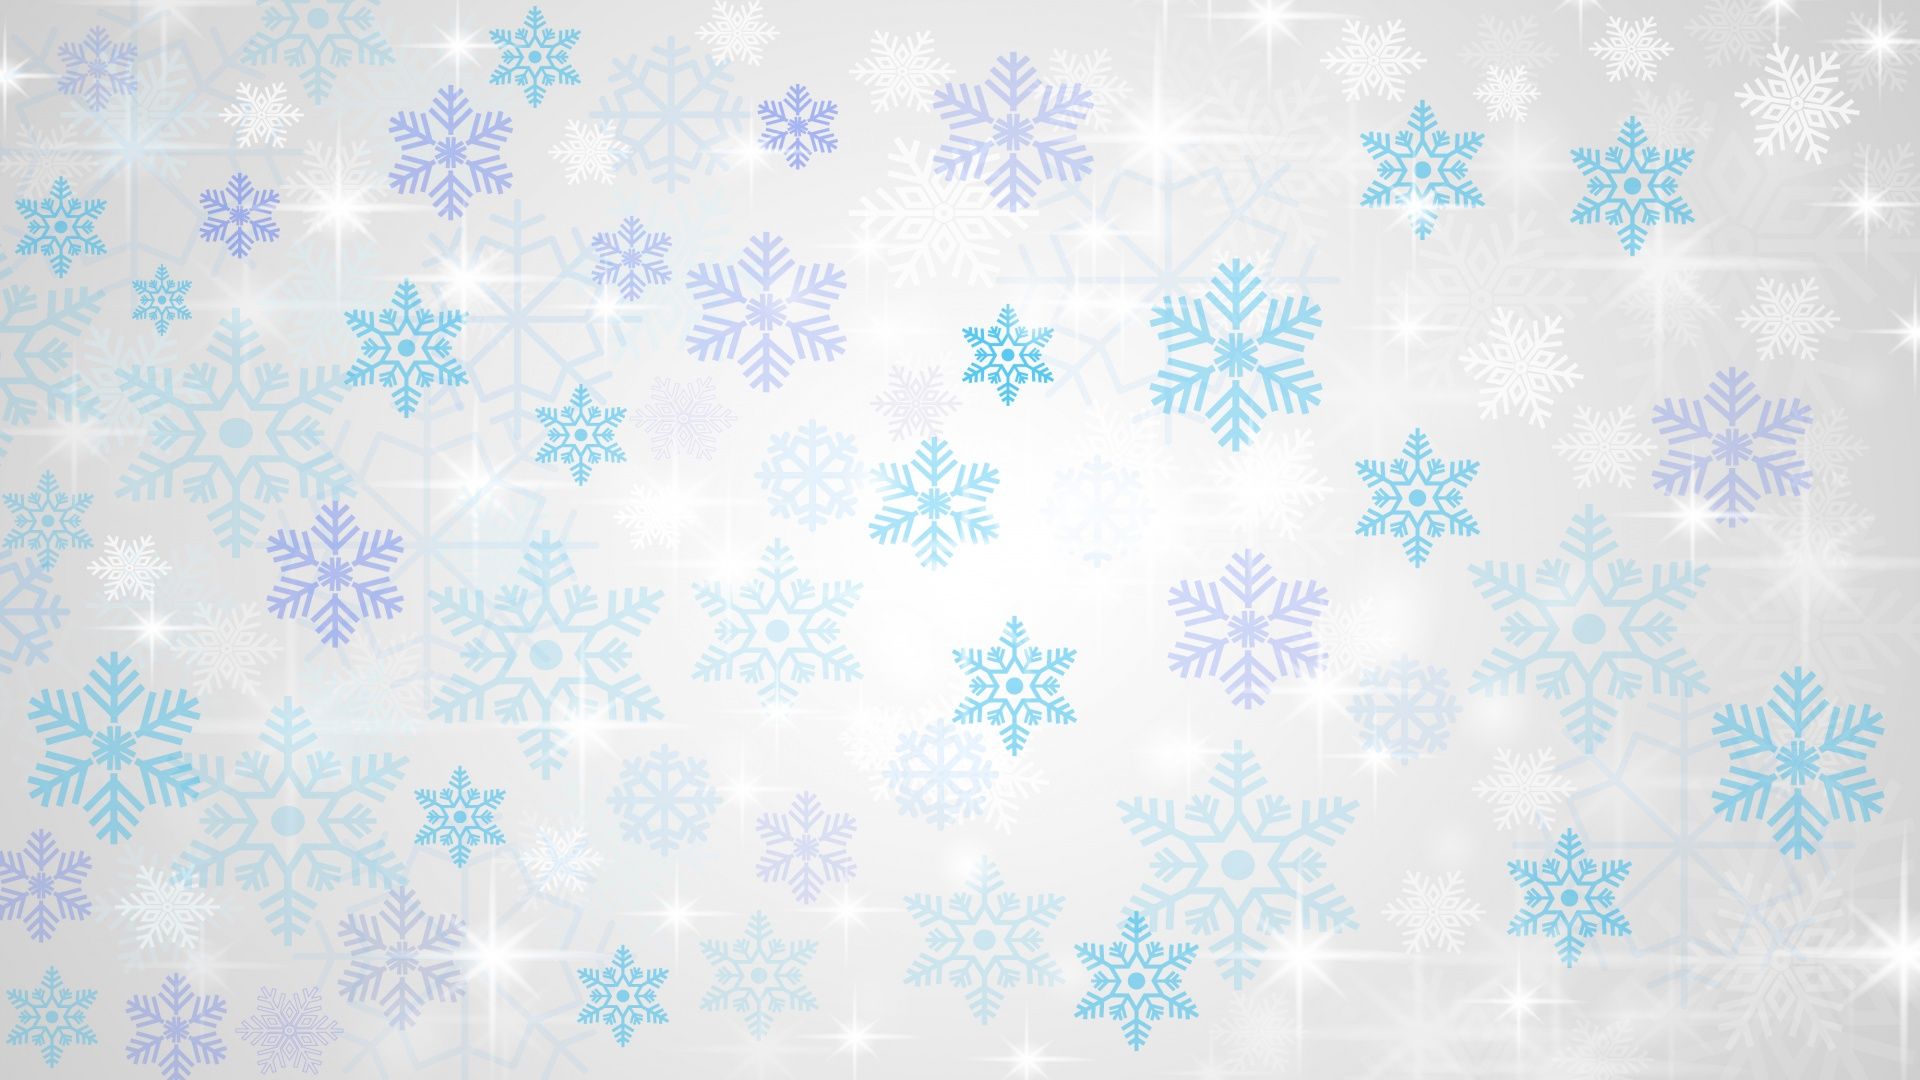 New Year With Snowflakes download nice wallpaper